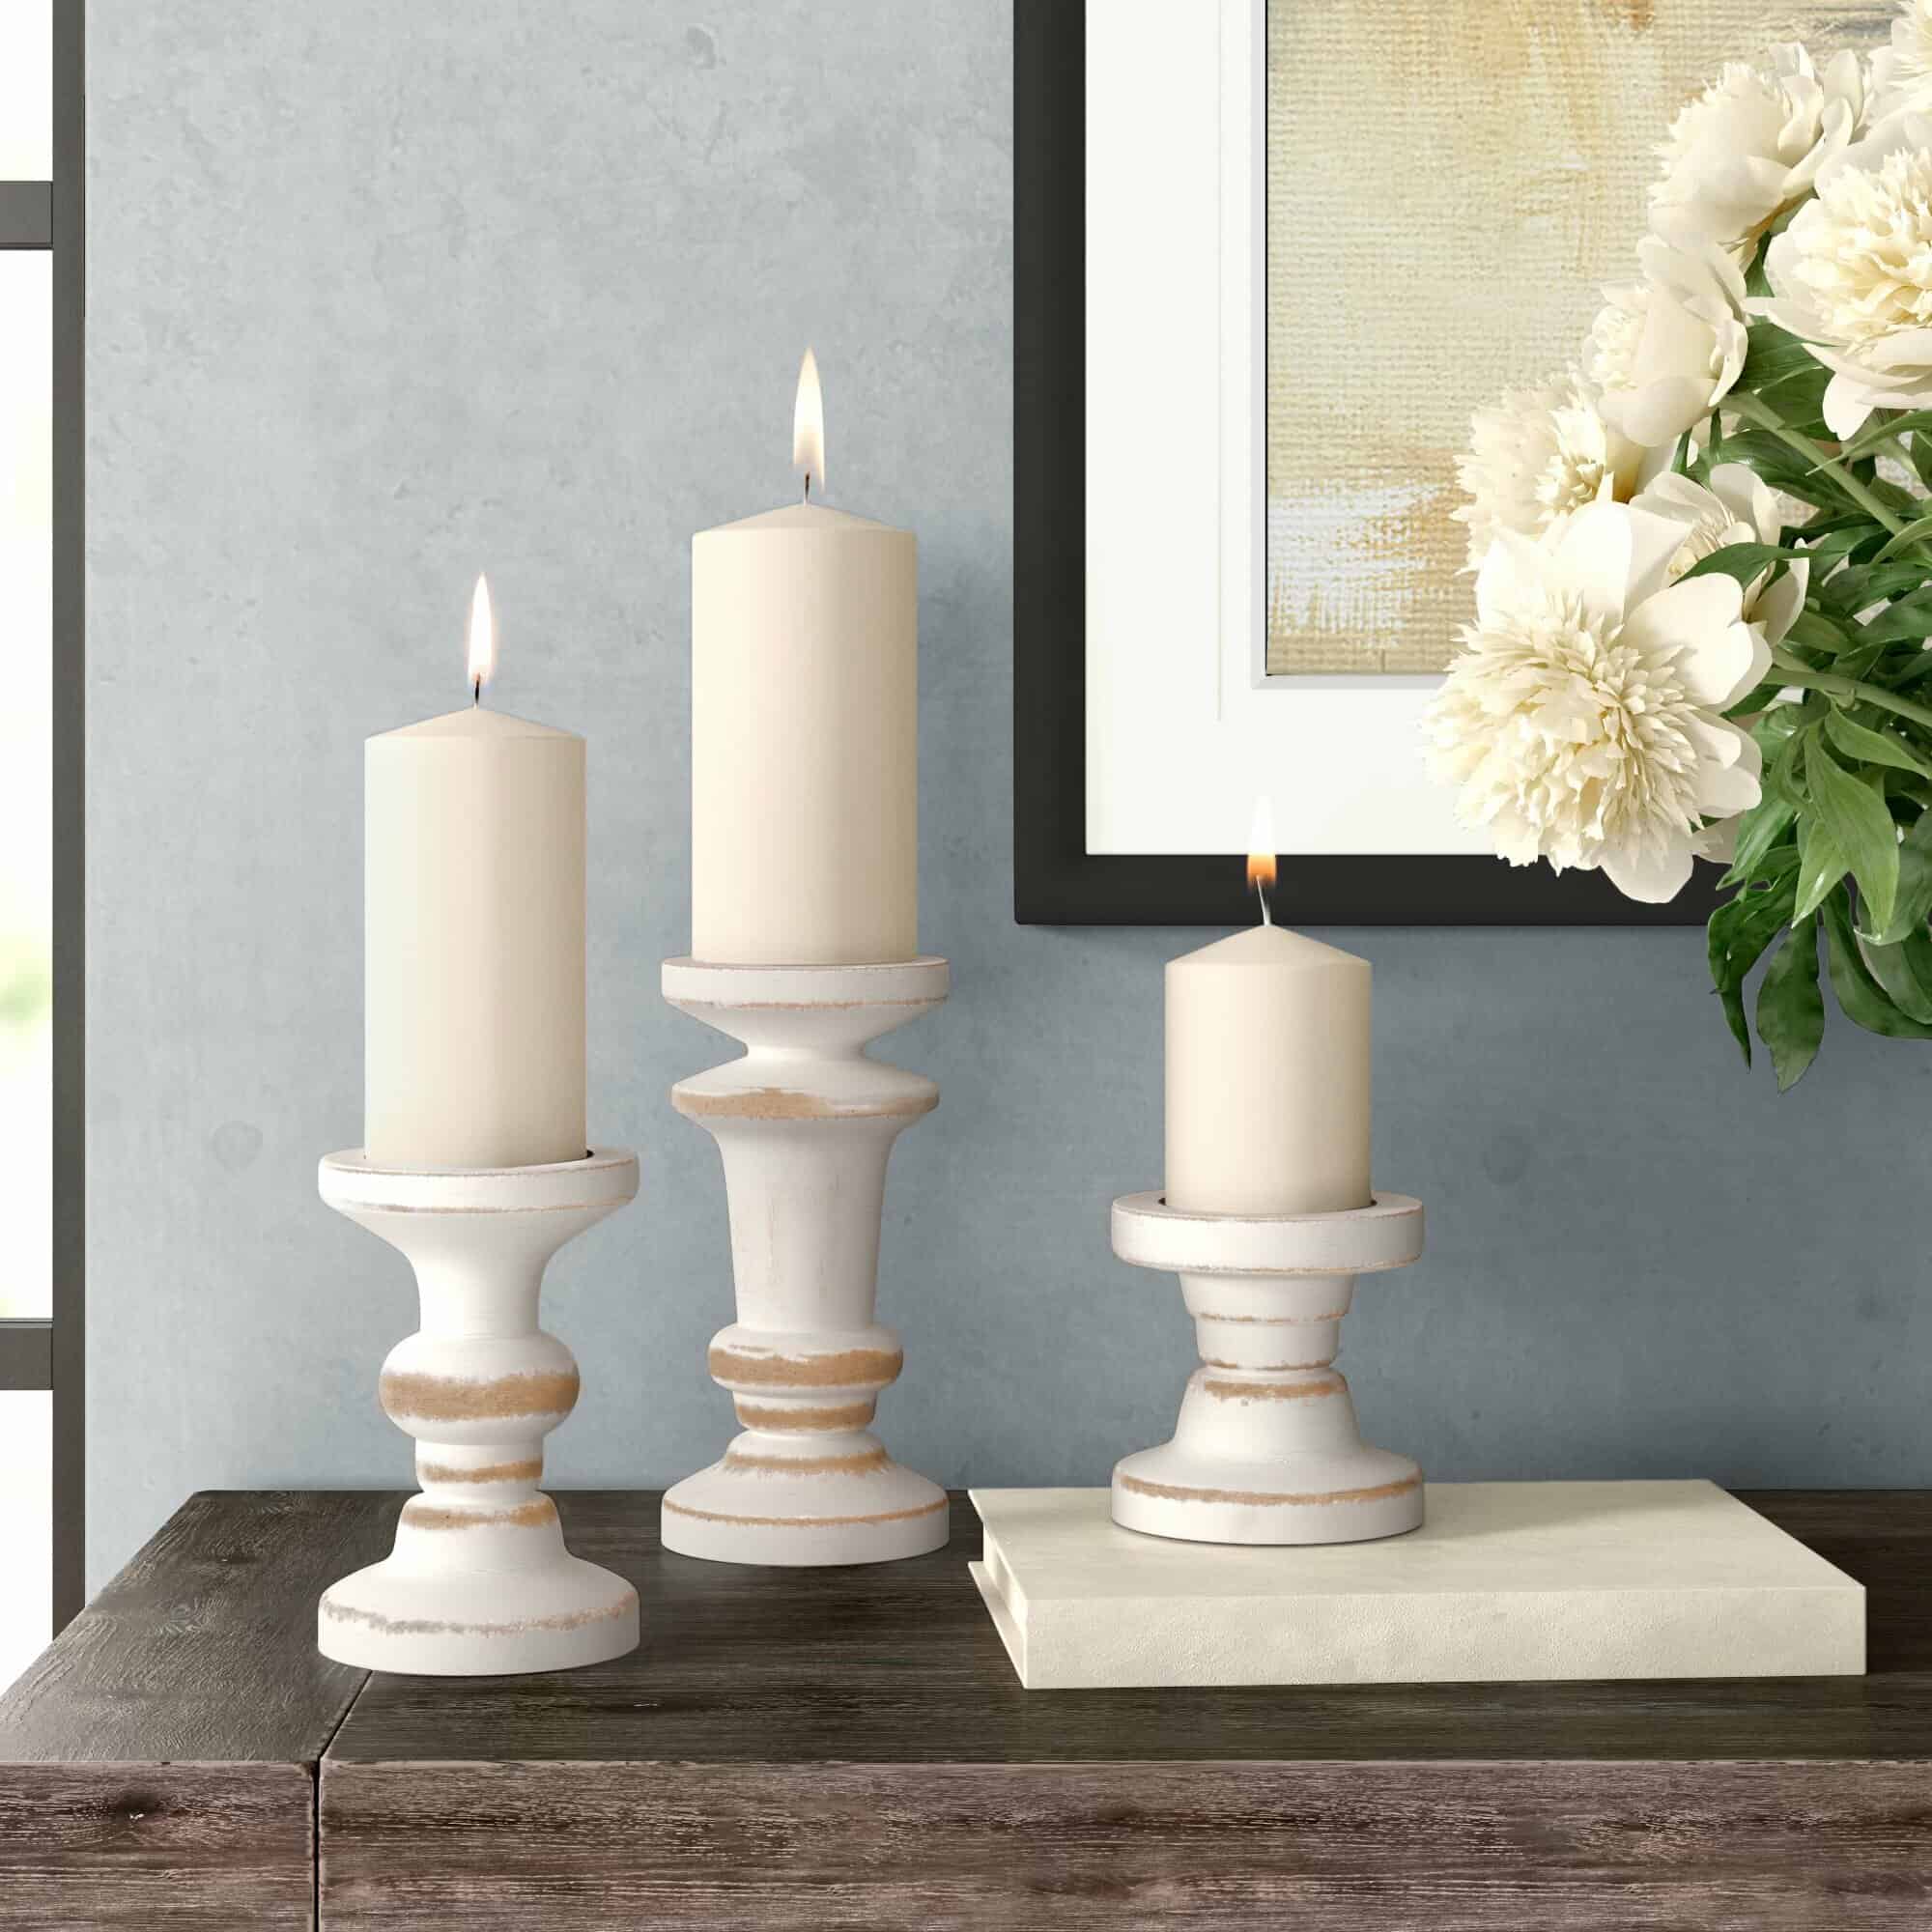 Choose Some Beige Candle Holders For A Vintage Touch